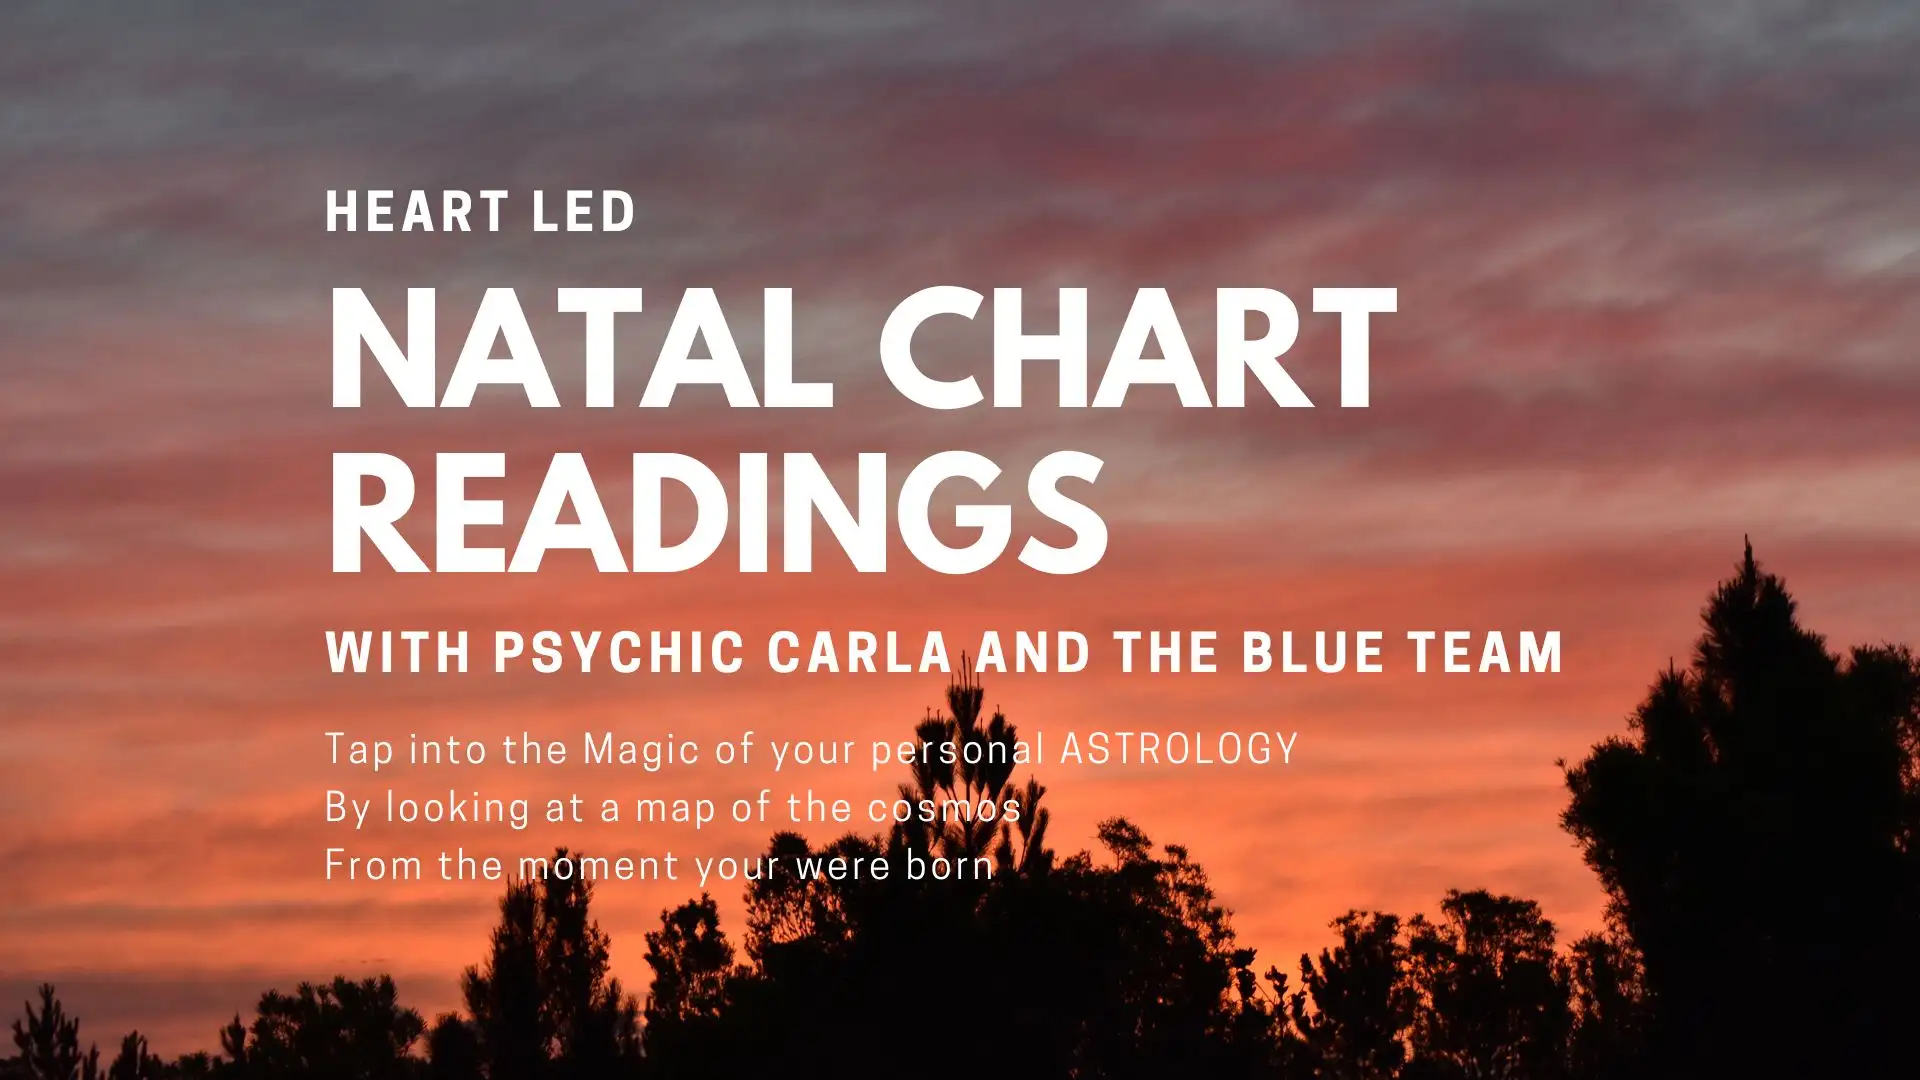 Heart Led Natal Chart Readings with Psychic Carla and the Blue Team The Blue Team are a group of higher dimensional light beings Anyone can call on these beings for assistance Some might call them archangels or ascended masters They are just pure light - pure vibrational love - mostly (but not exclusively) vibrating in the spectrum of blue light